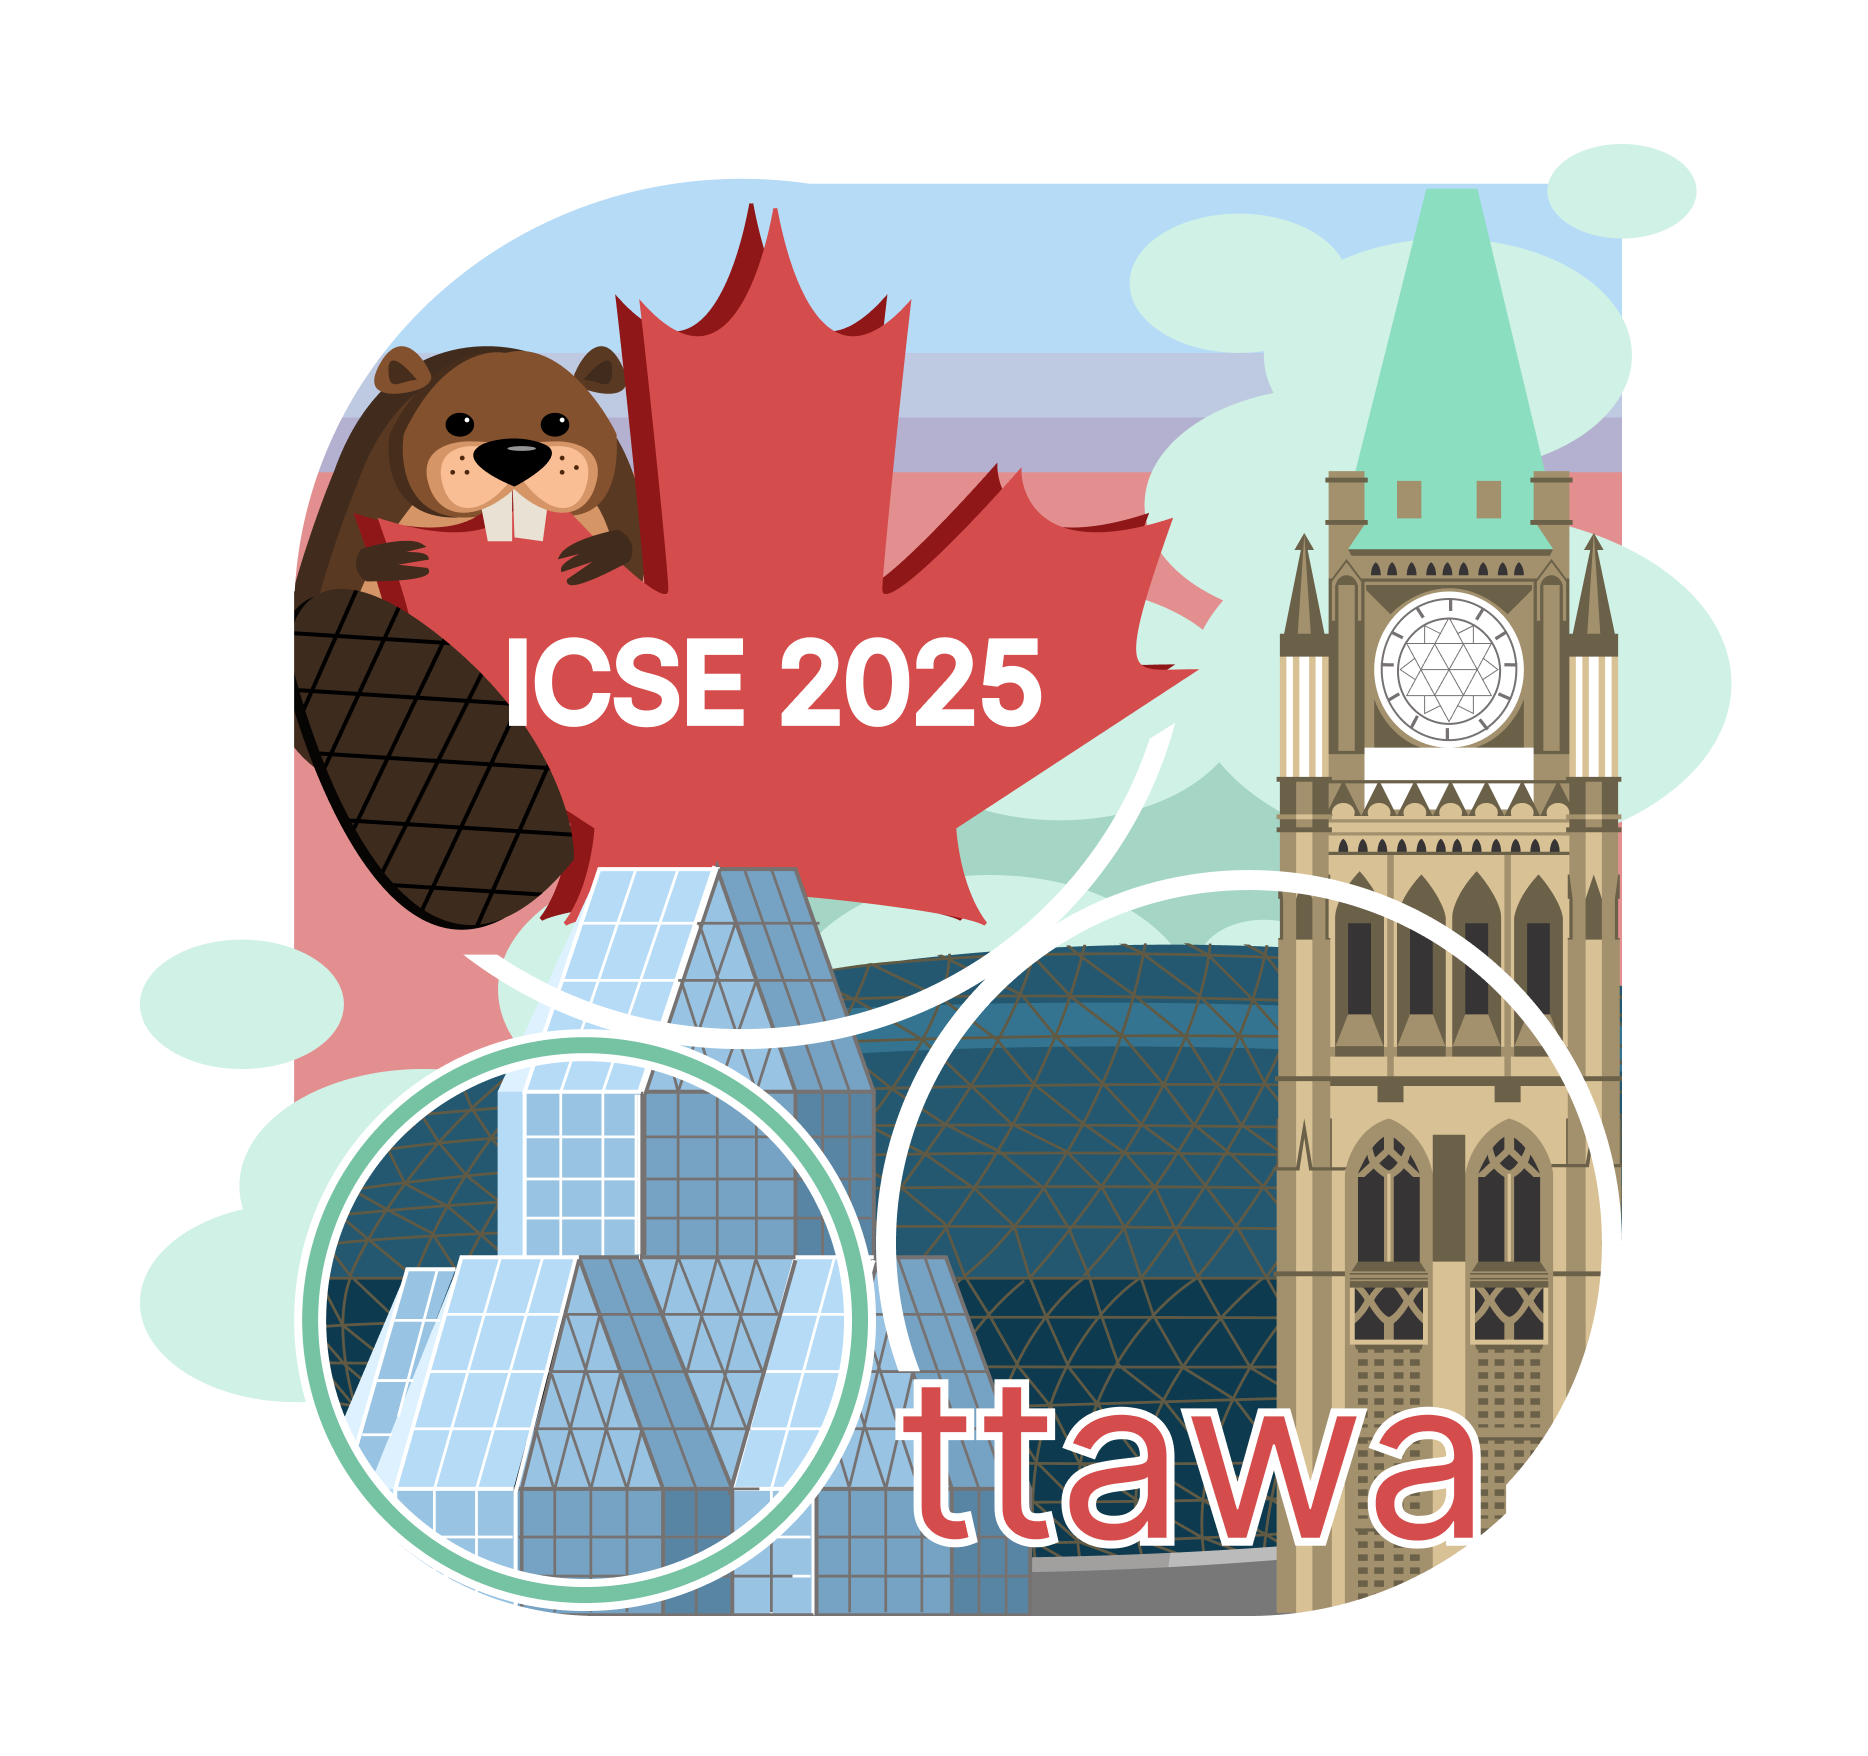 ICSE 2025 (47th International Conference on Software Engineering)